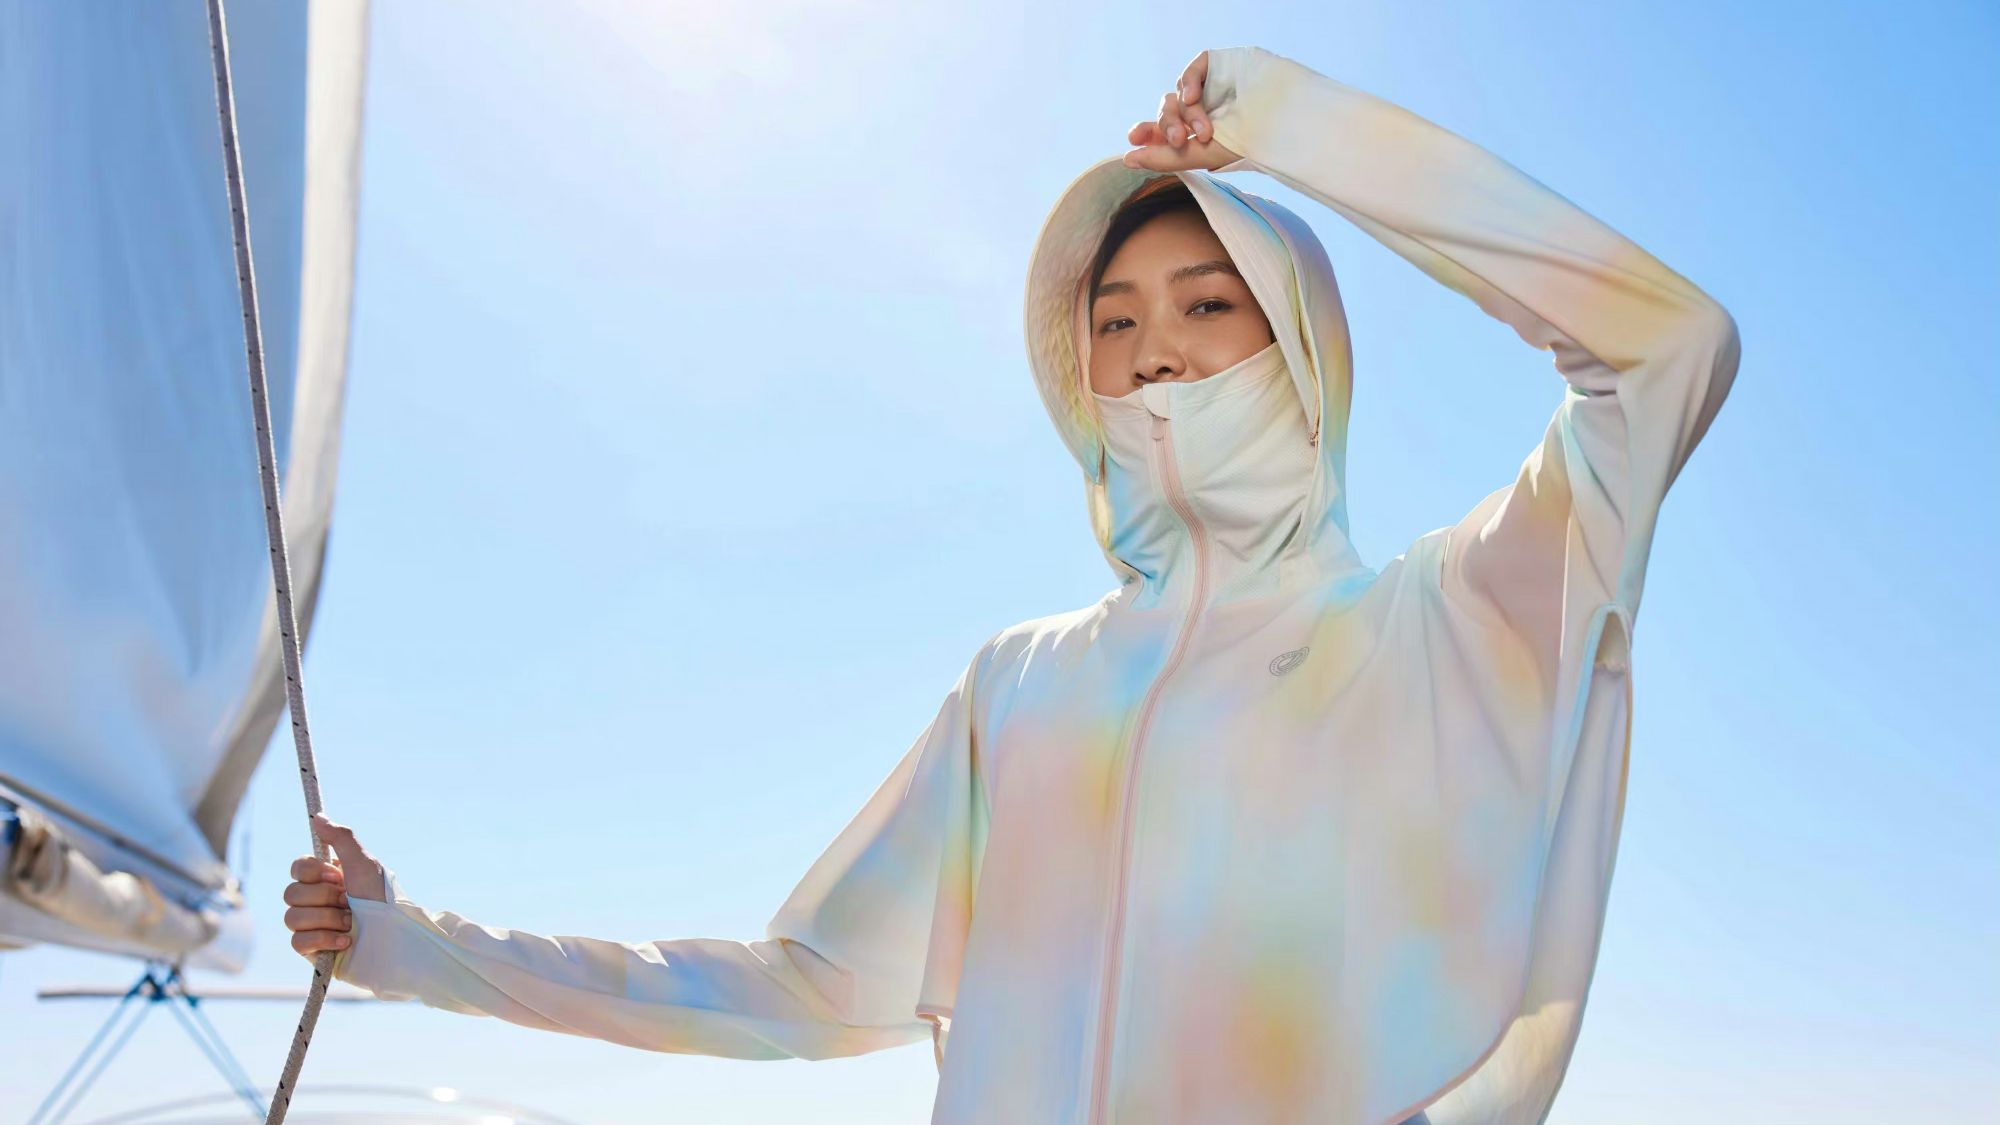 Tmall Nearly Triples Sales of Sun Protection Clothing in China Heat Wave